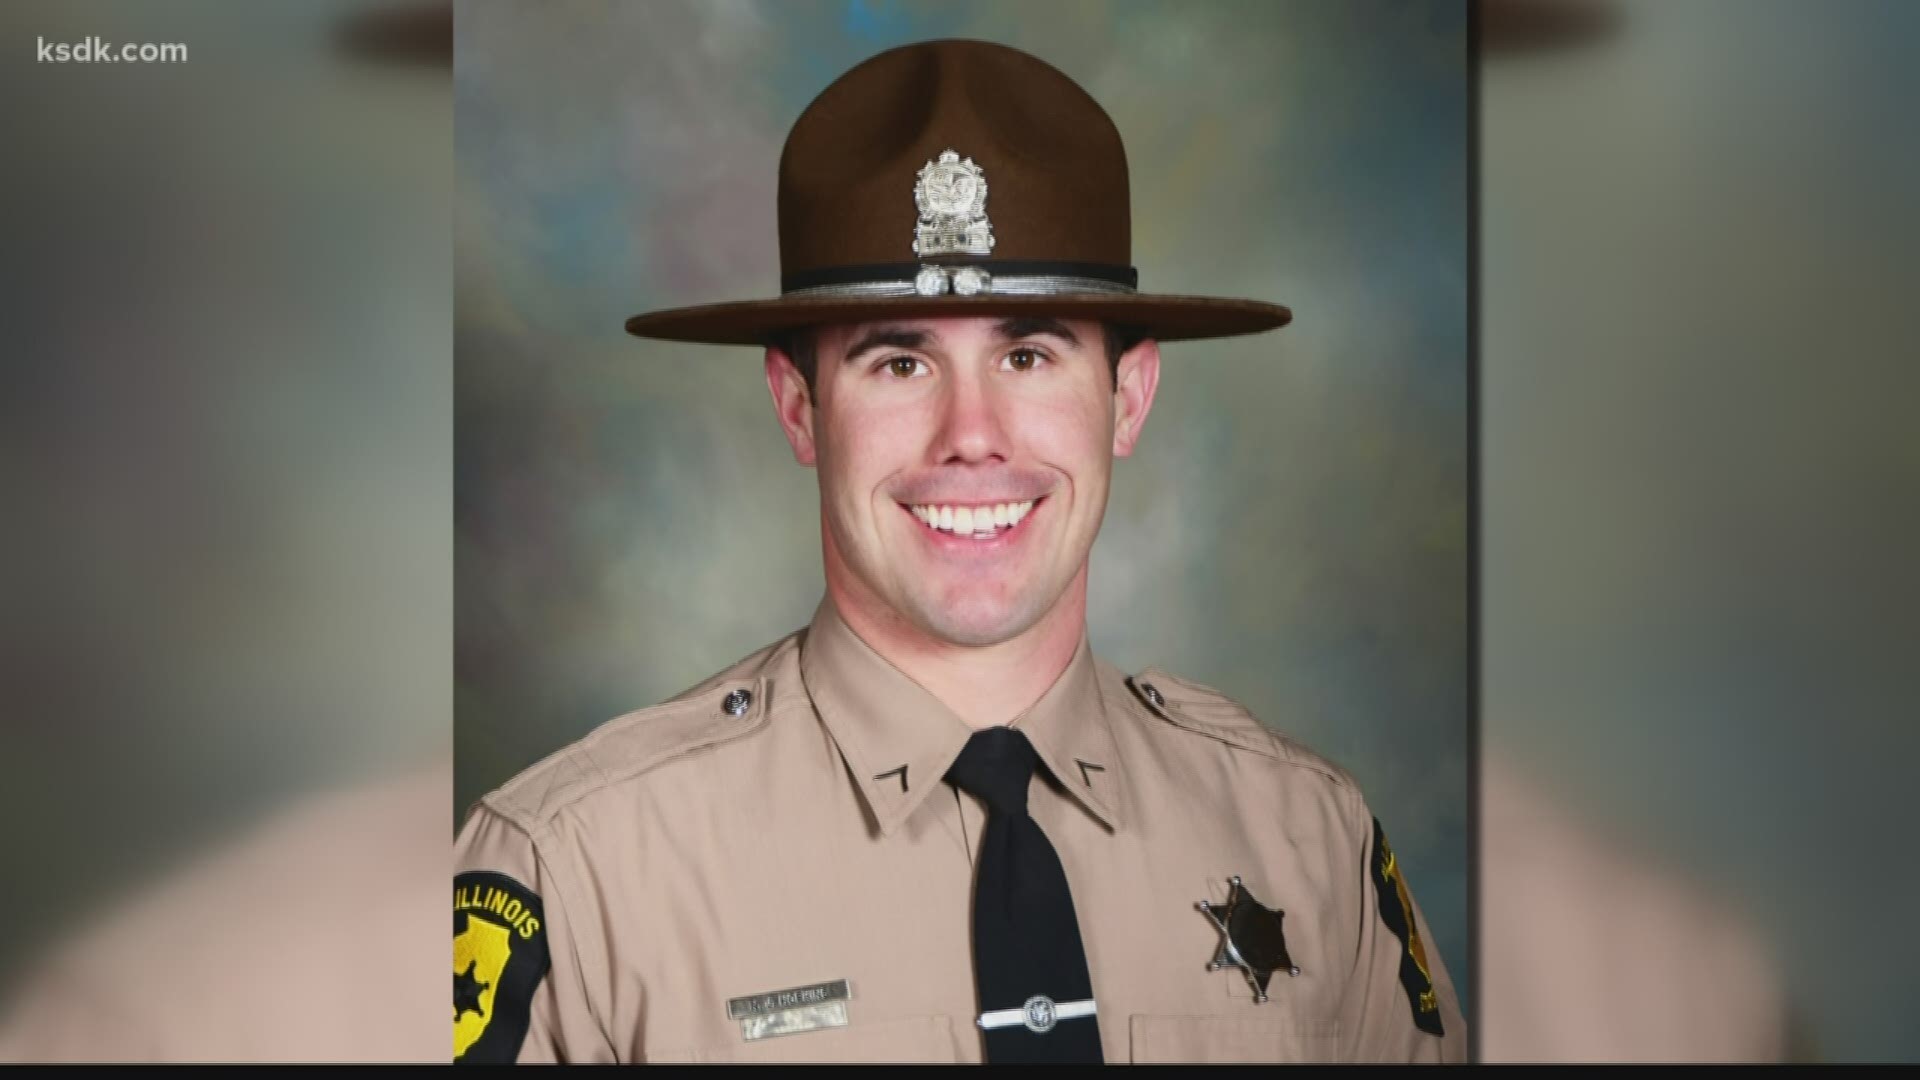 A large turnout is expected for a fundraiser remembering fallen Illinois State Trooper Nick Hopkins.